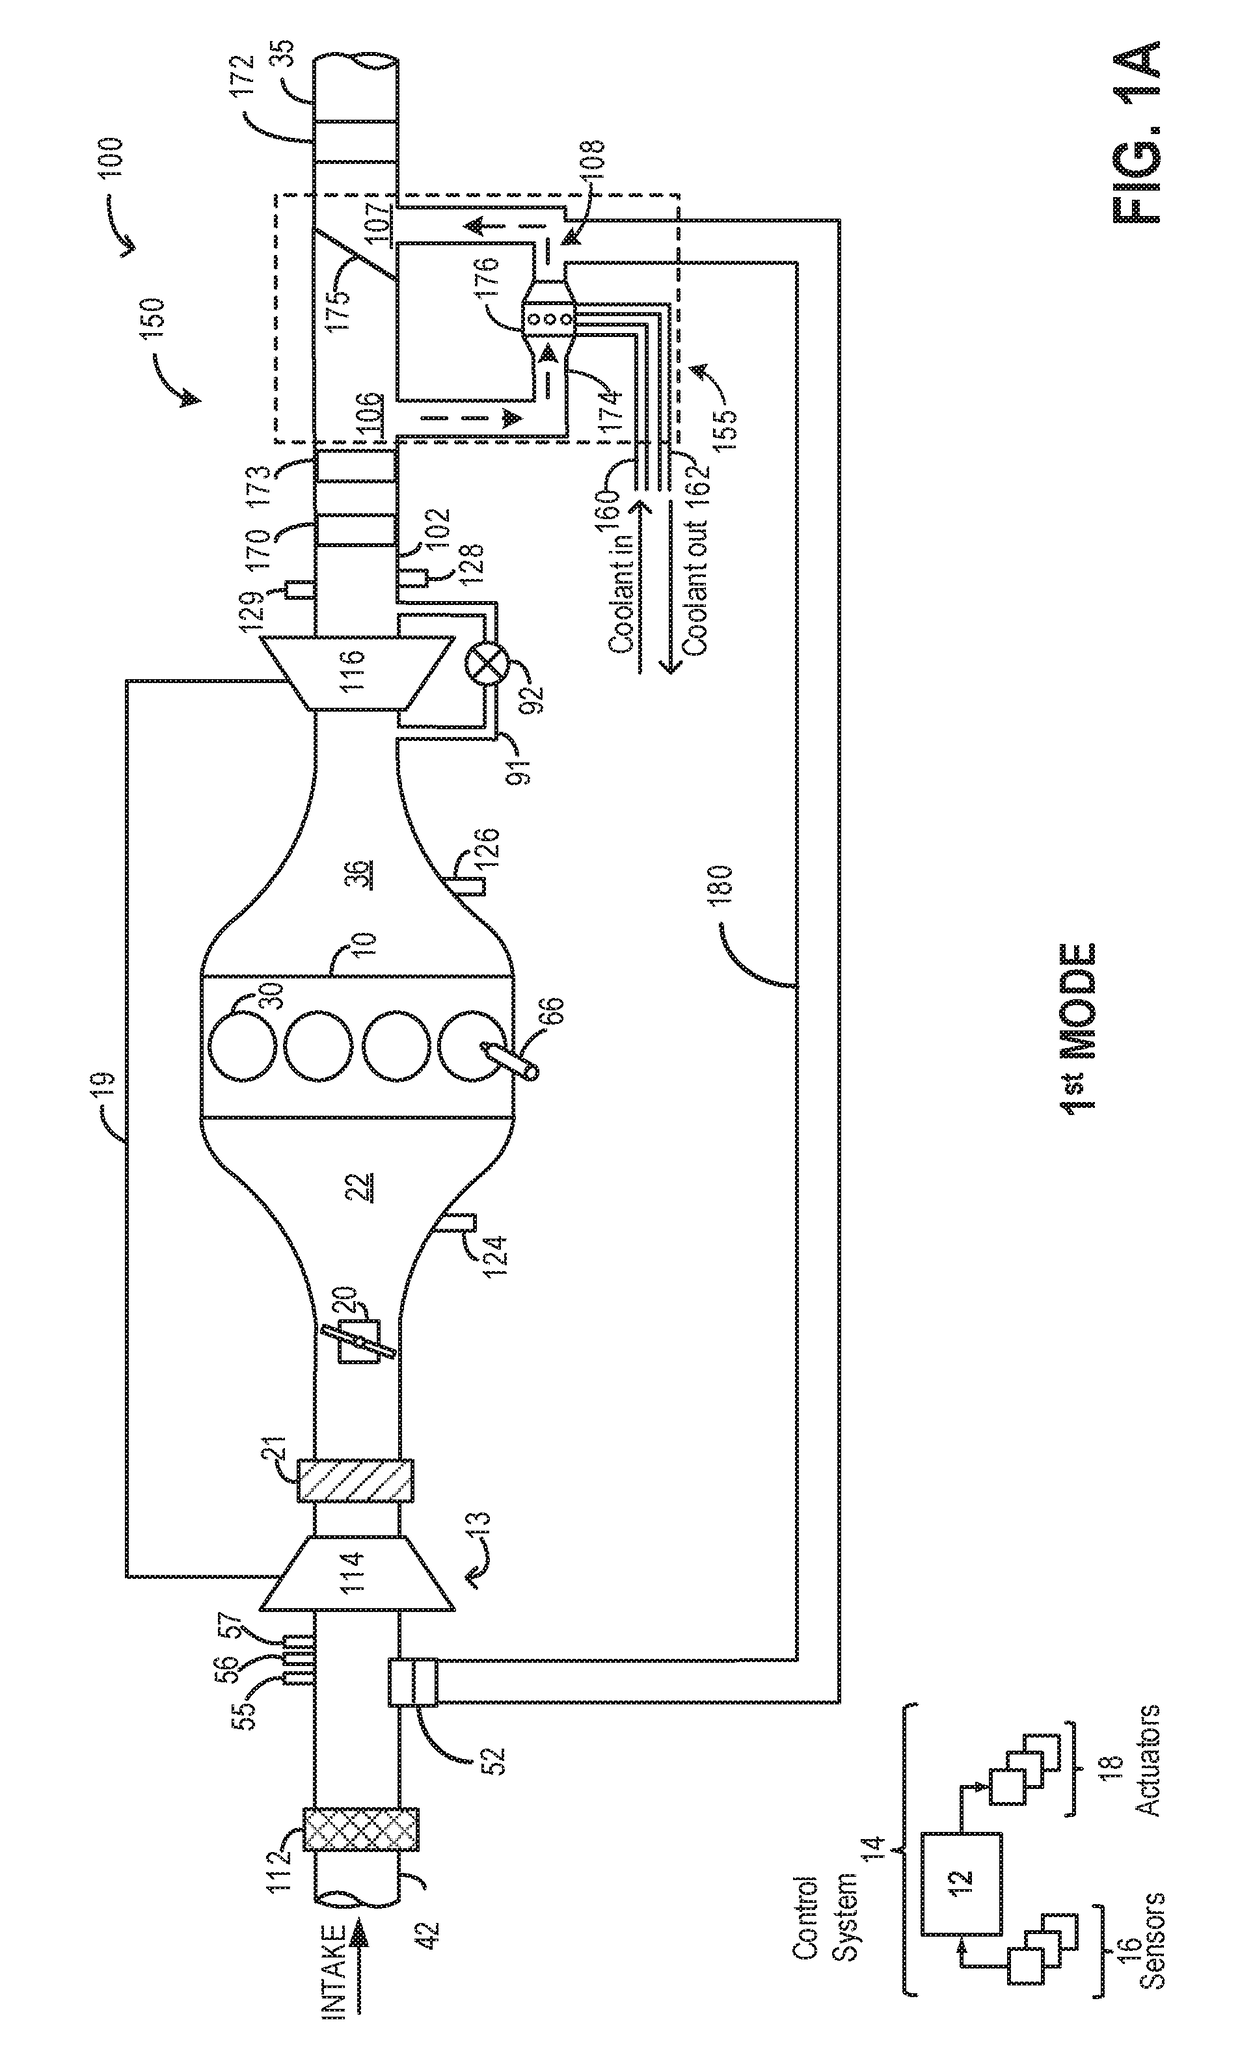 Method and system for exhaust gas recirculation and heat recovery